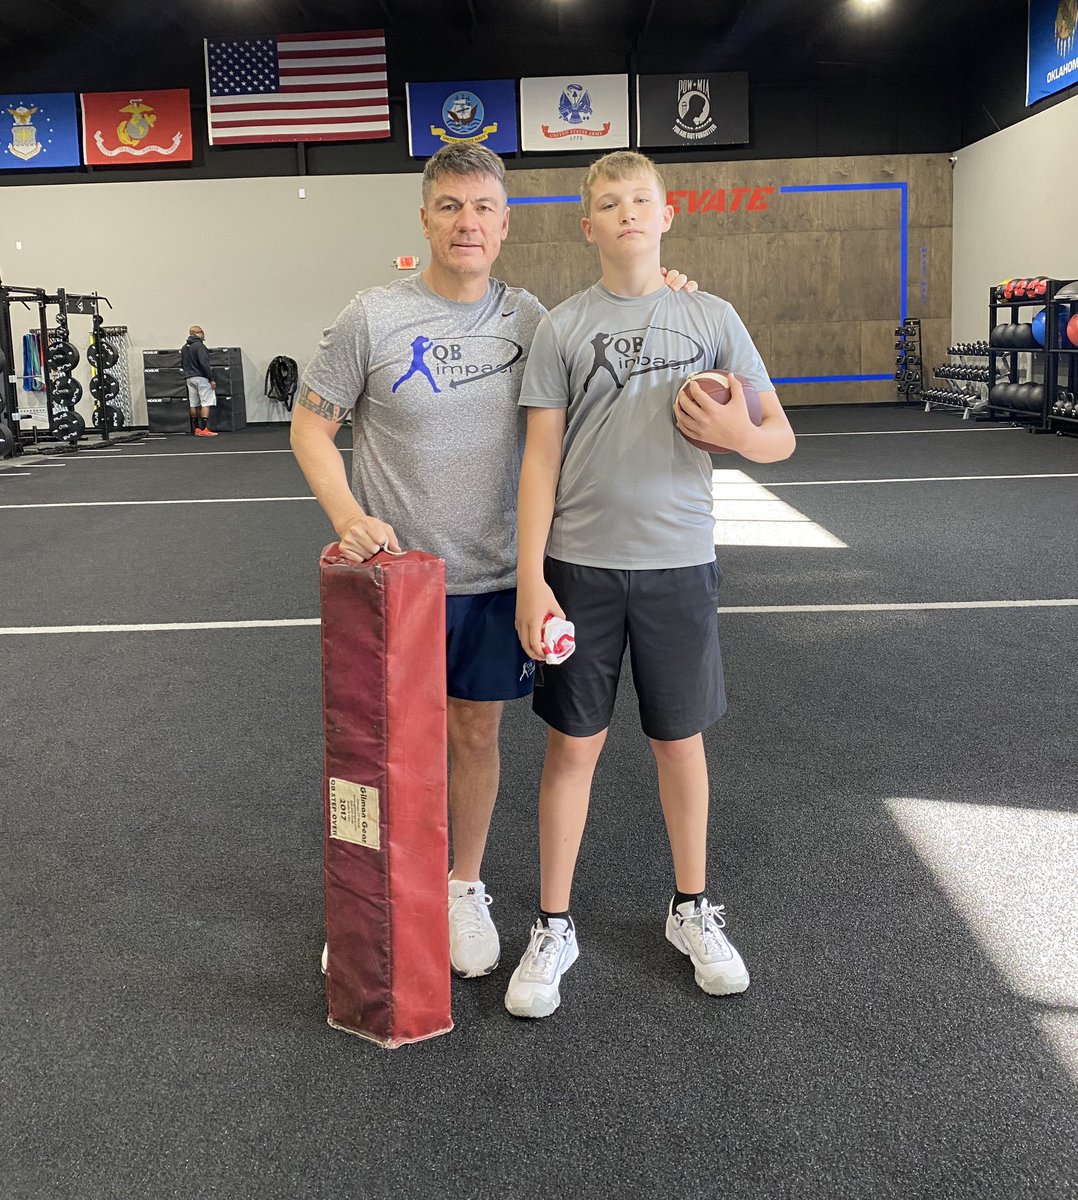 2029 Bowling Green, Kentucky QB @hholloway2029 - “Spring Break”, instead of a vacation, he chose a 12 drive to Oklahoma. 2 QB Training sessions a day, total of (7) w/ @CoachGeorge5, and a Strength session w/ @BO_SIAH #QBi He grew, got better, improves his QB play and mind!!